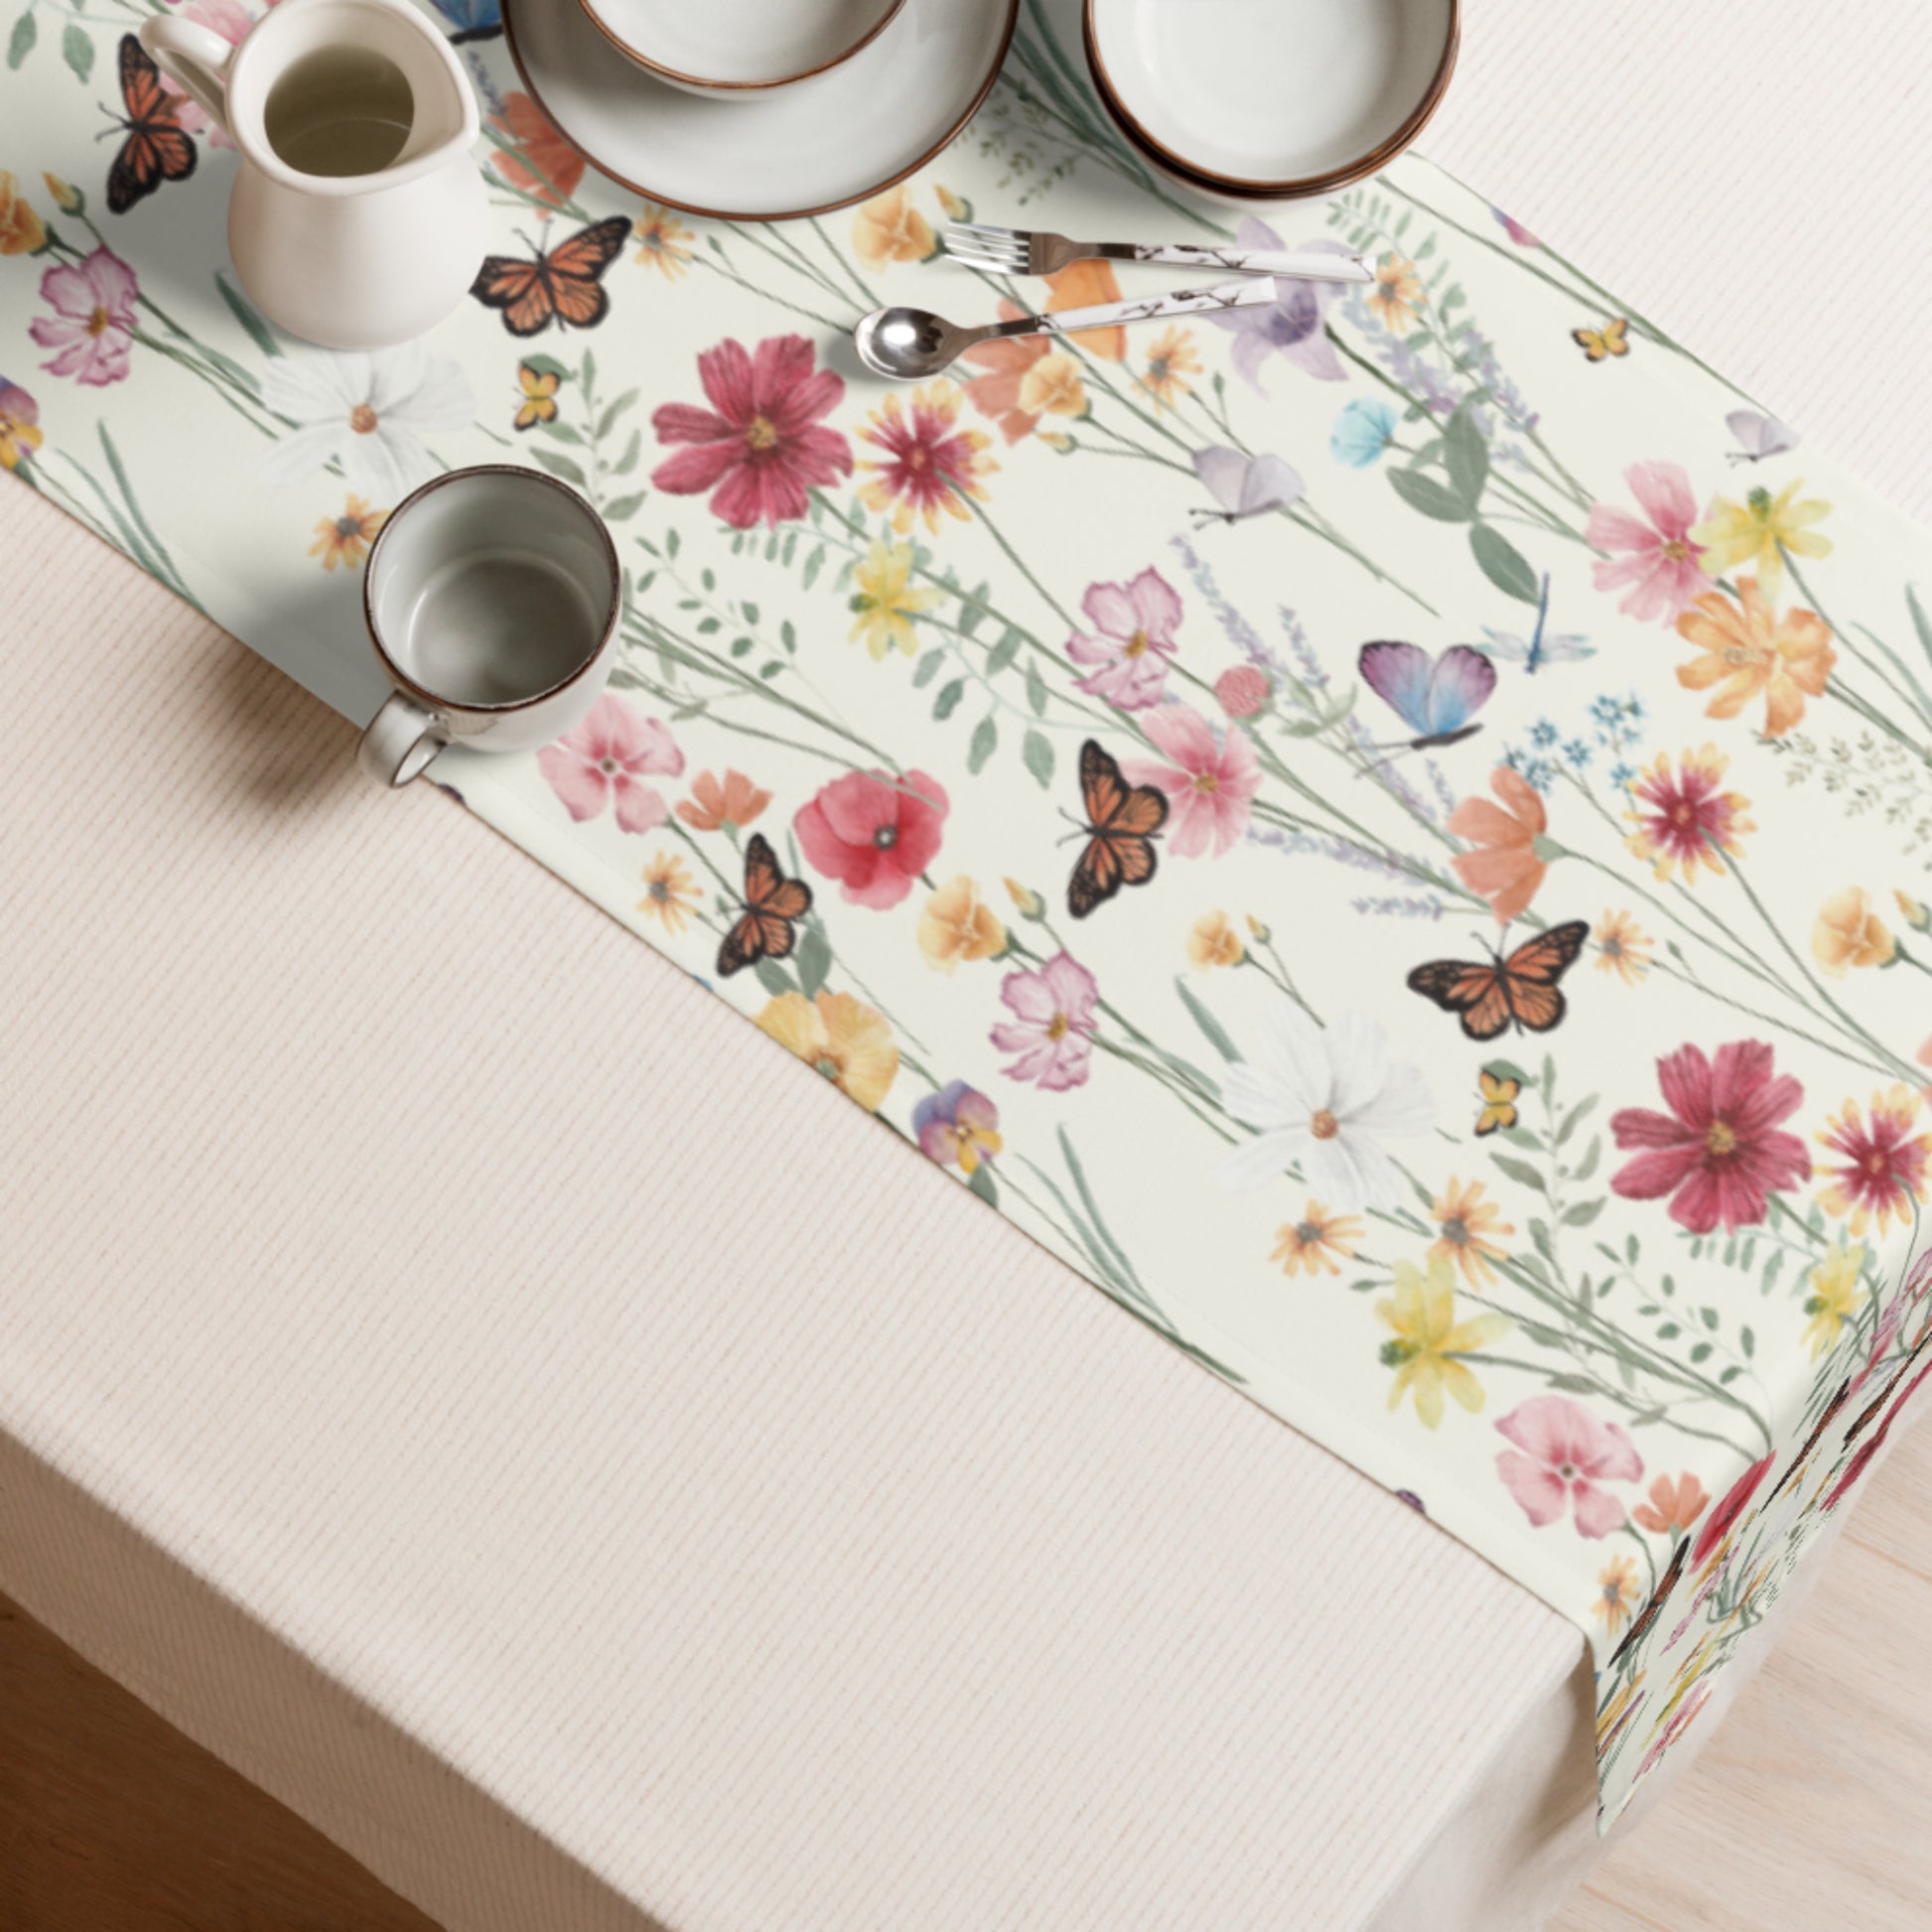 flower table runner on table with mugs and cups